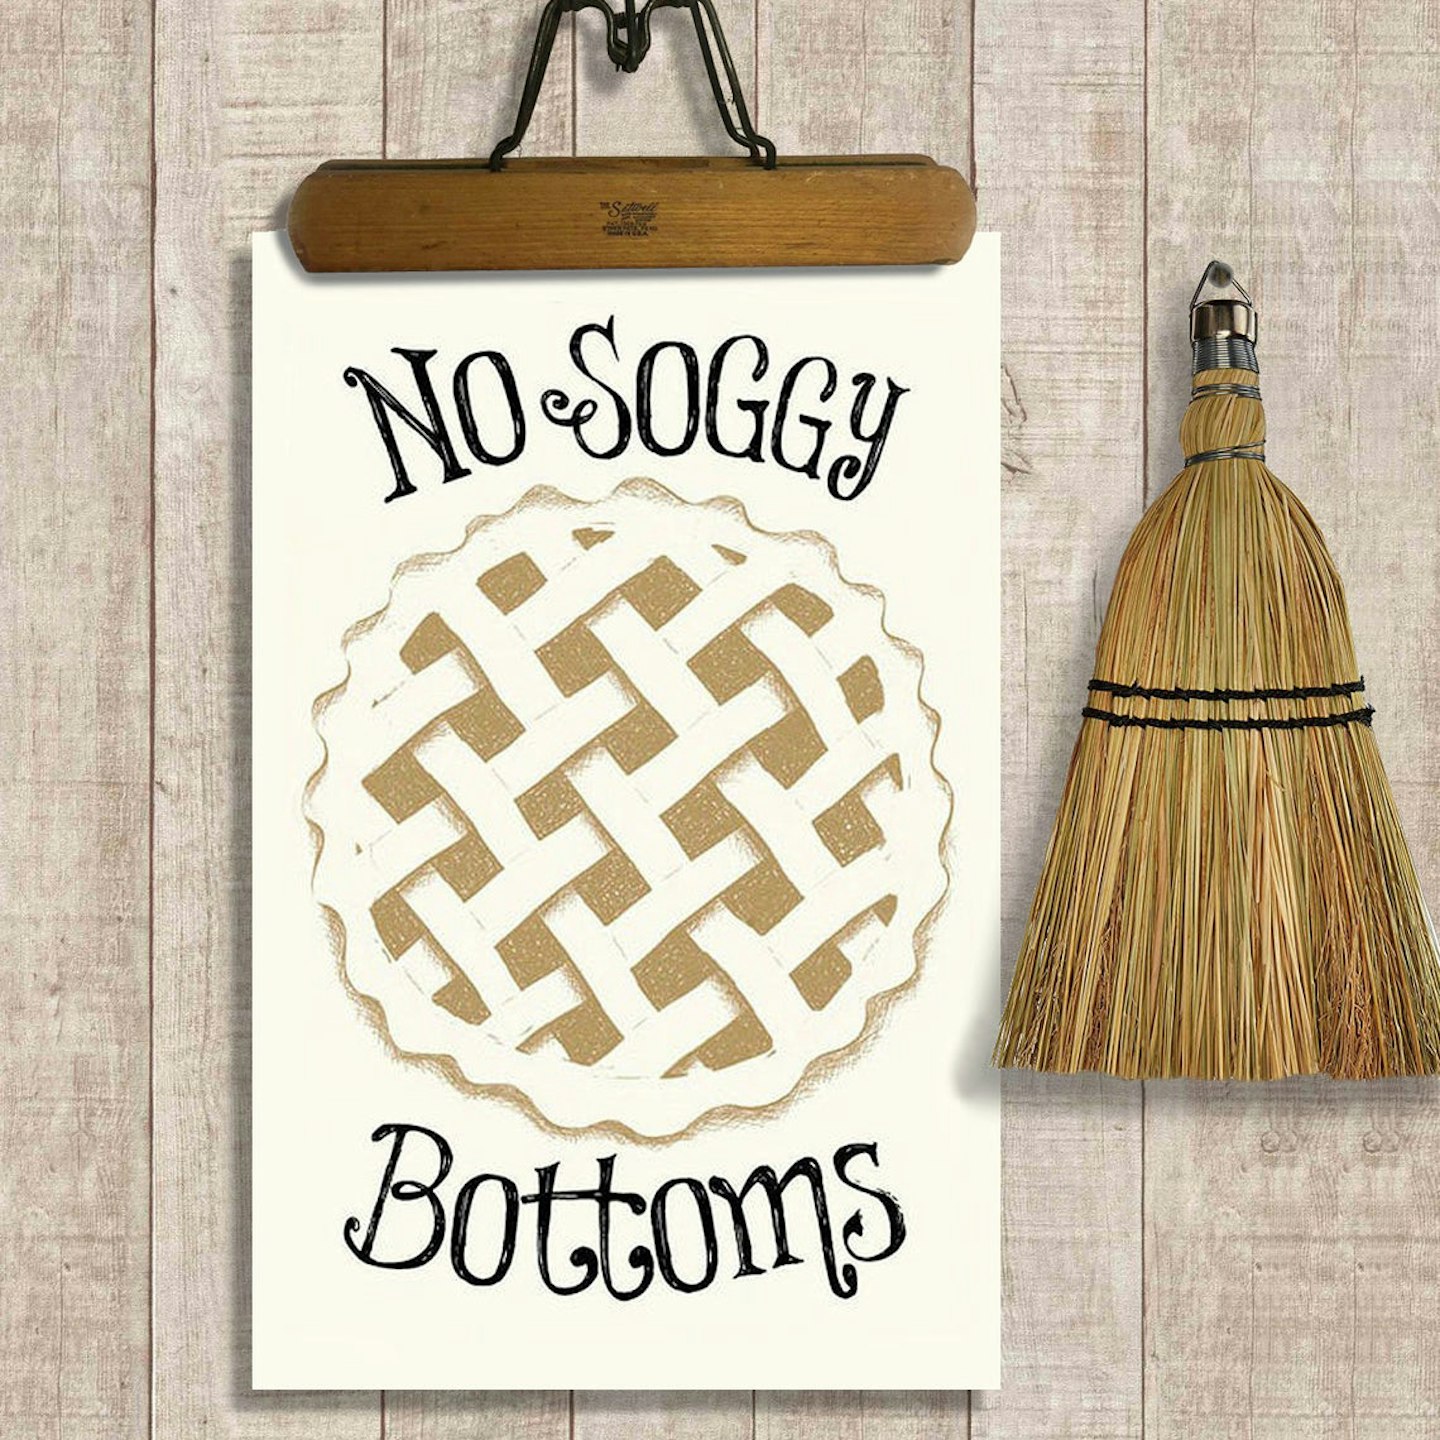 No Soggy Bottoms sign